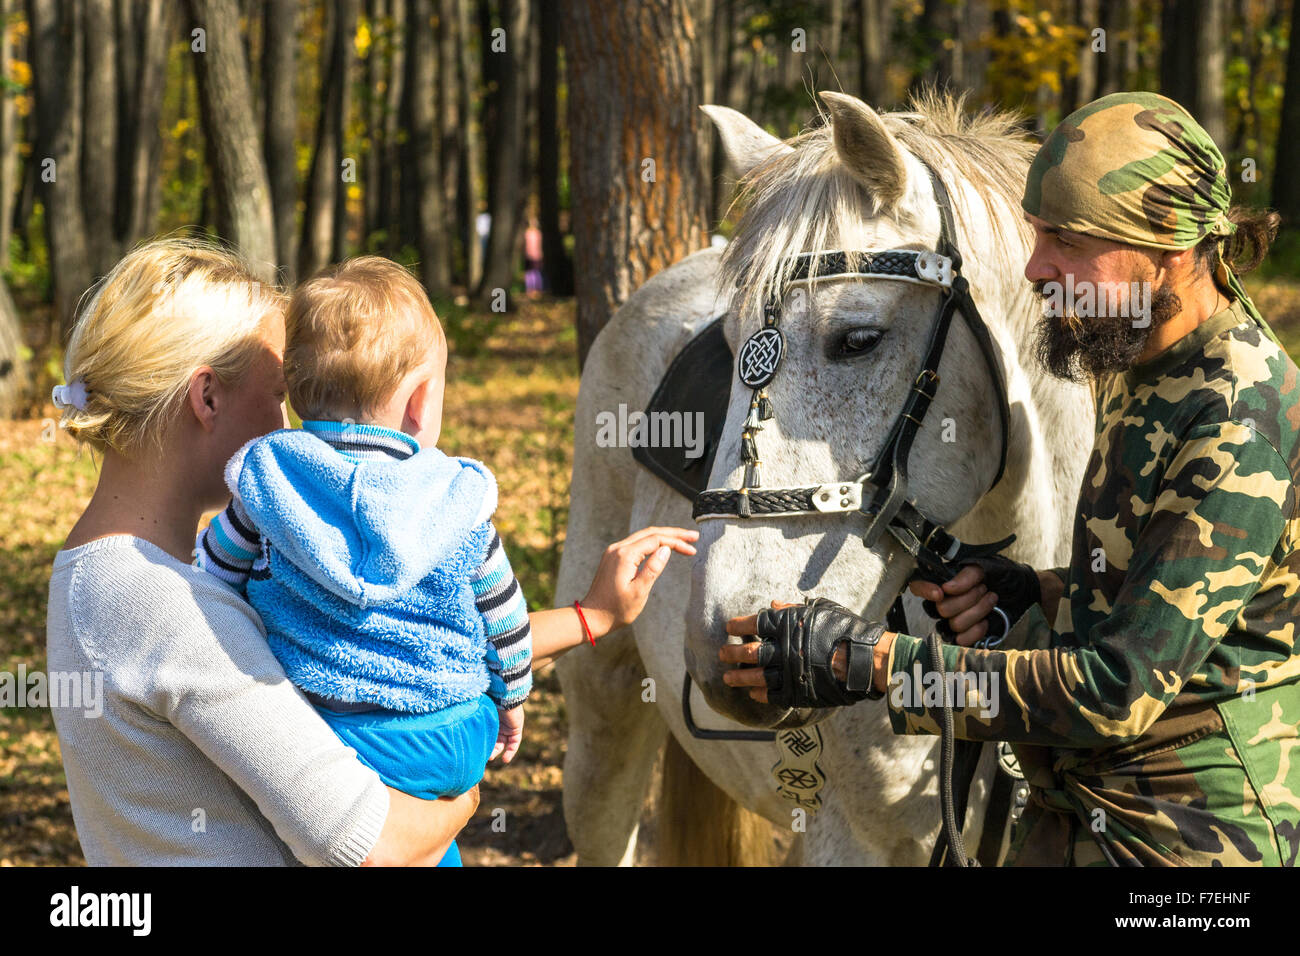 23/09 - Man in military camouflage strokes a white horse as a woman and young baby look at the expression of affection in Ufa Ru Stock Photo